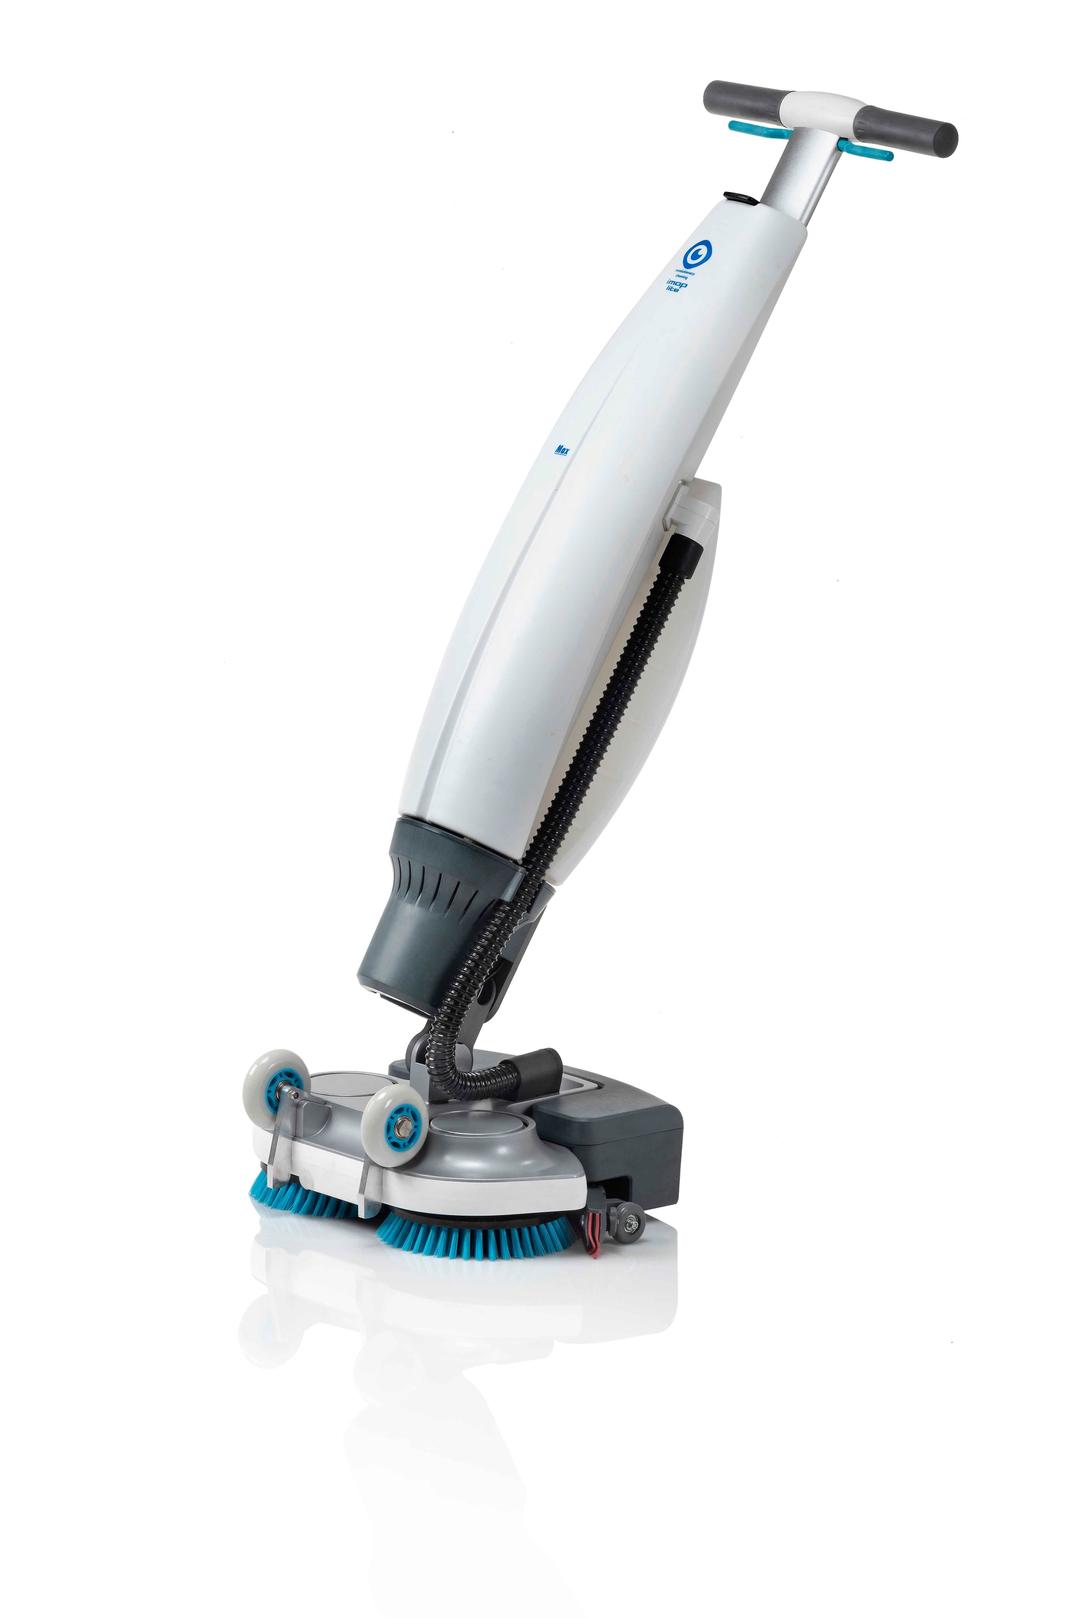 i-mop lite side angle - best domestic floor scrubber